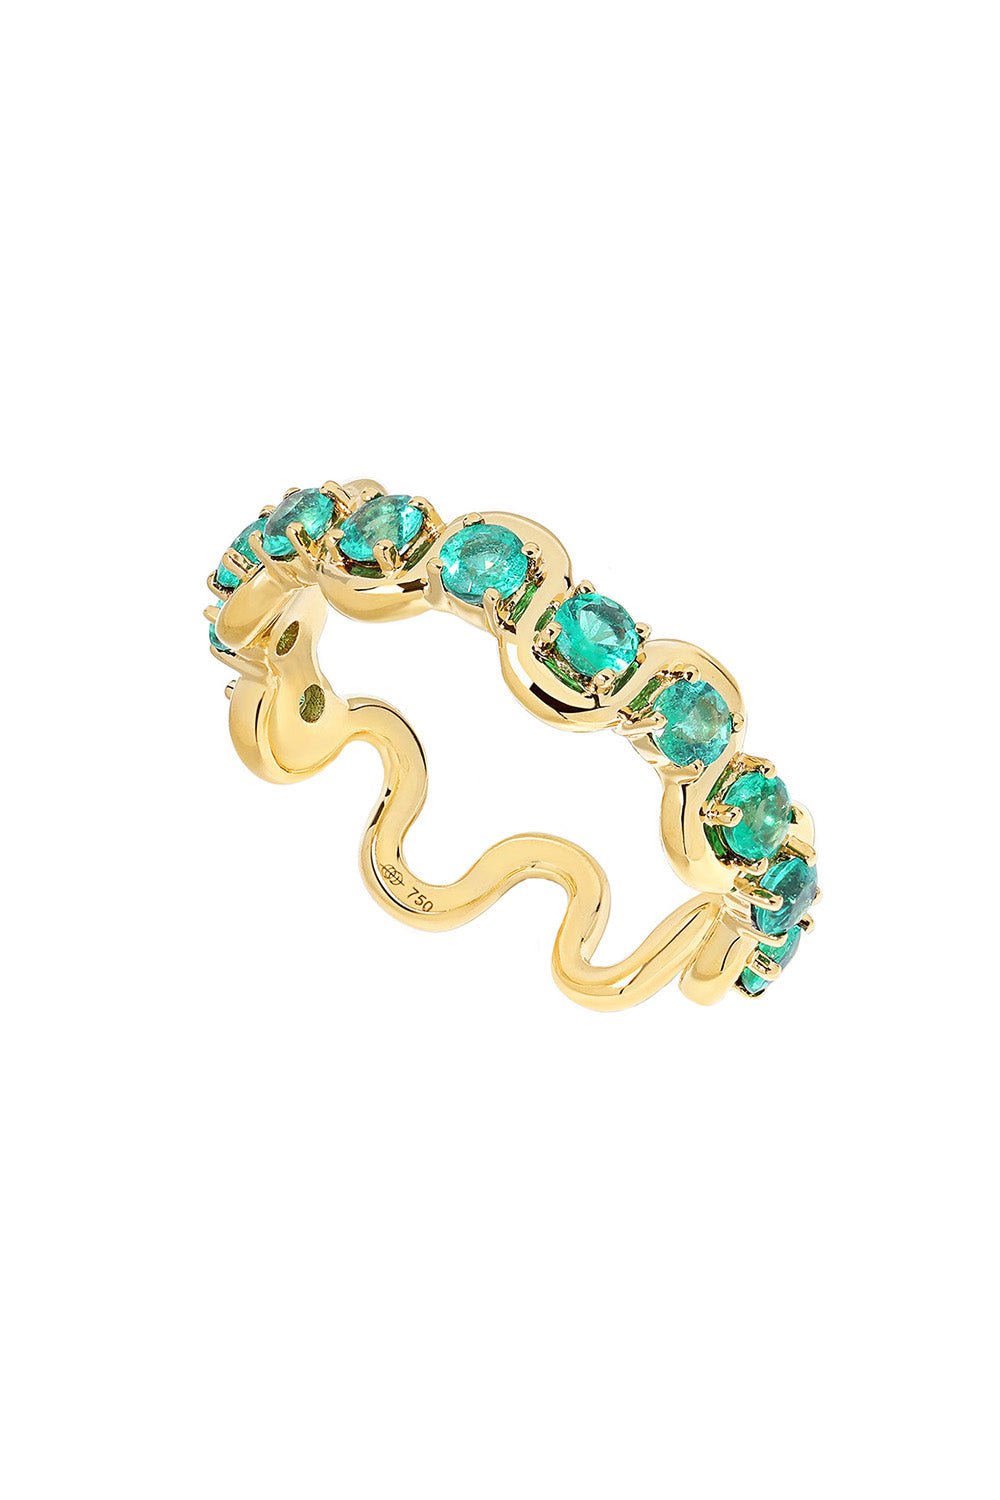 STATE PROPERTY-Edessa Emerald Eternity Ring-YELLOW GOLD